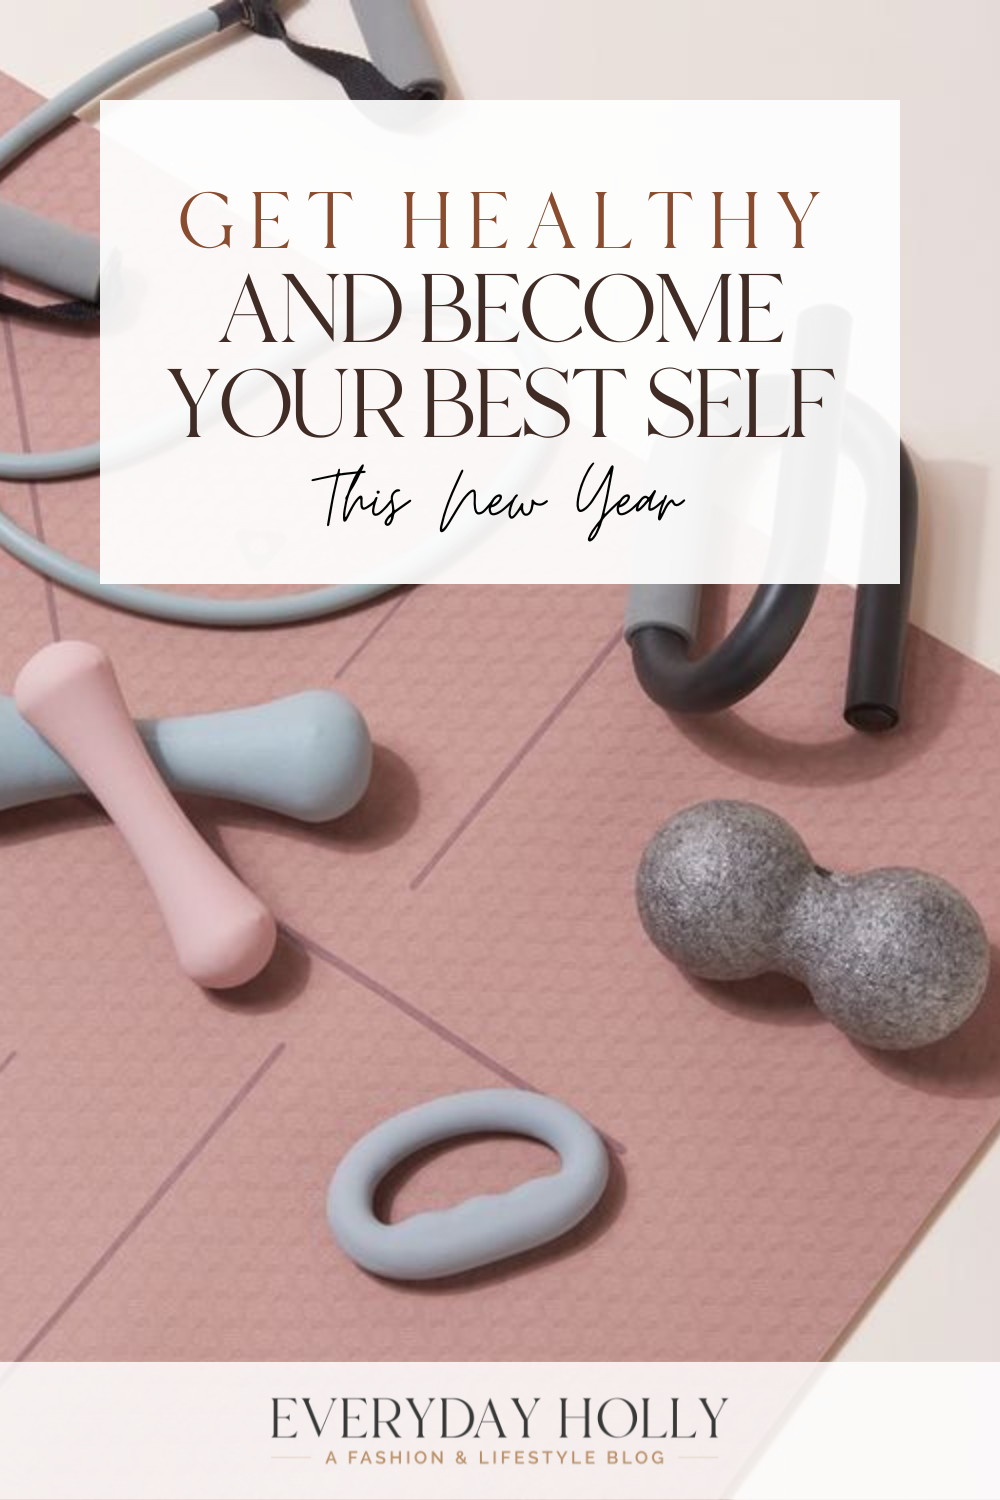 get healthy and become your best self this new year | #get #healthy #become #best #self #new #year #fitness #workout #resolution #goals #athleisure #athomeworkout #gym